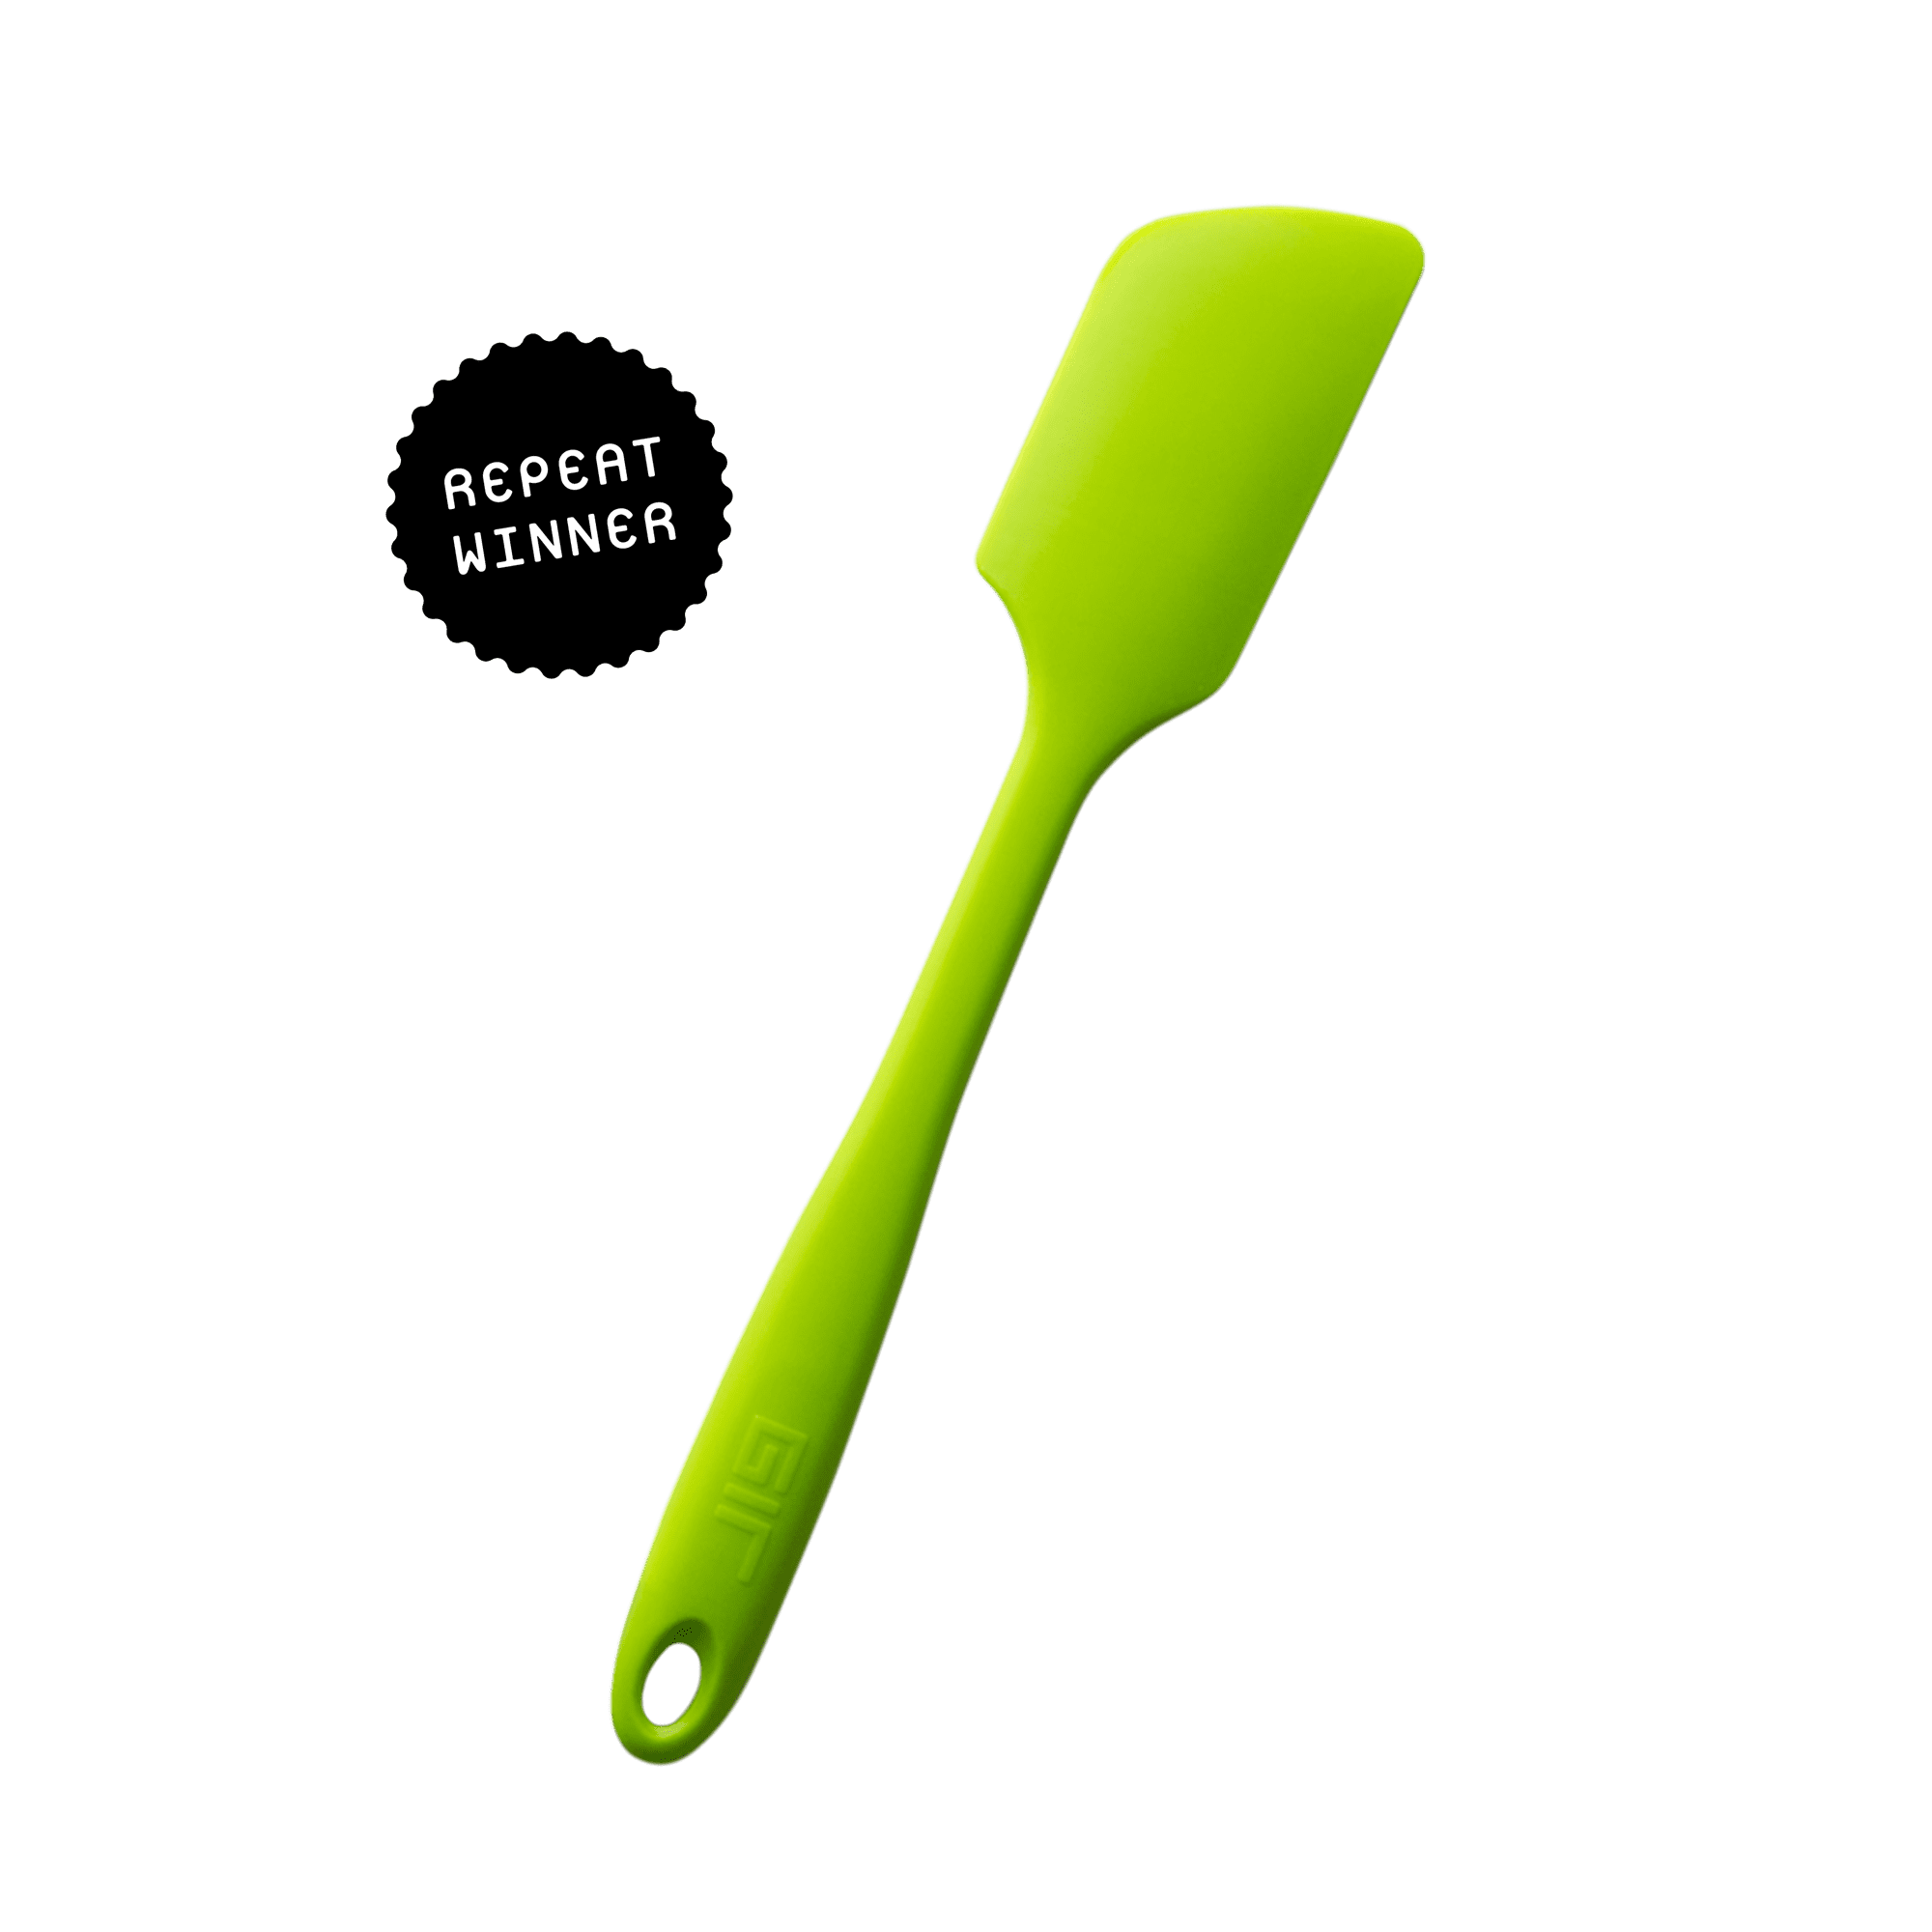 GIR Ultimate Flip Silicone Spatula, 5 Colors on Food52